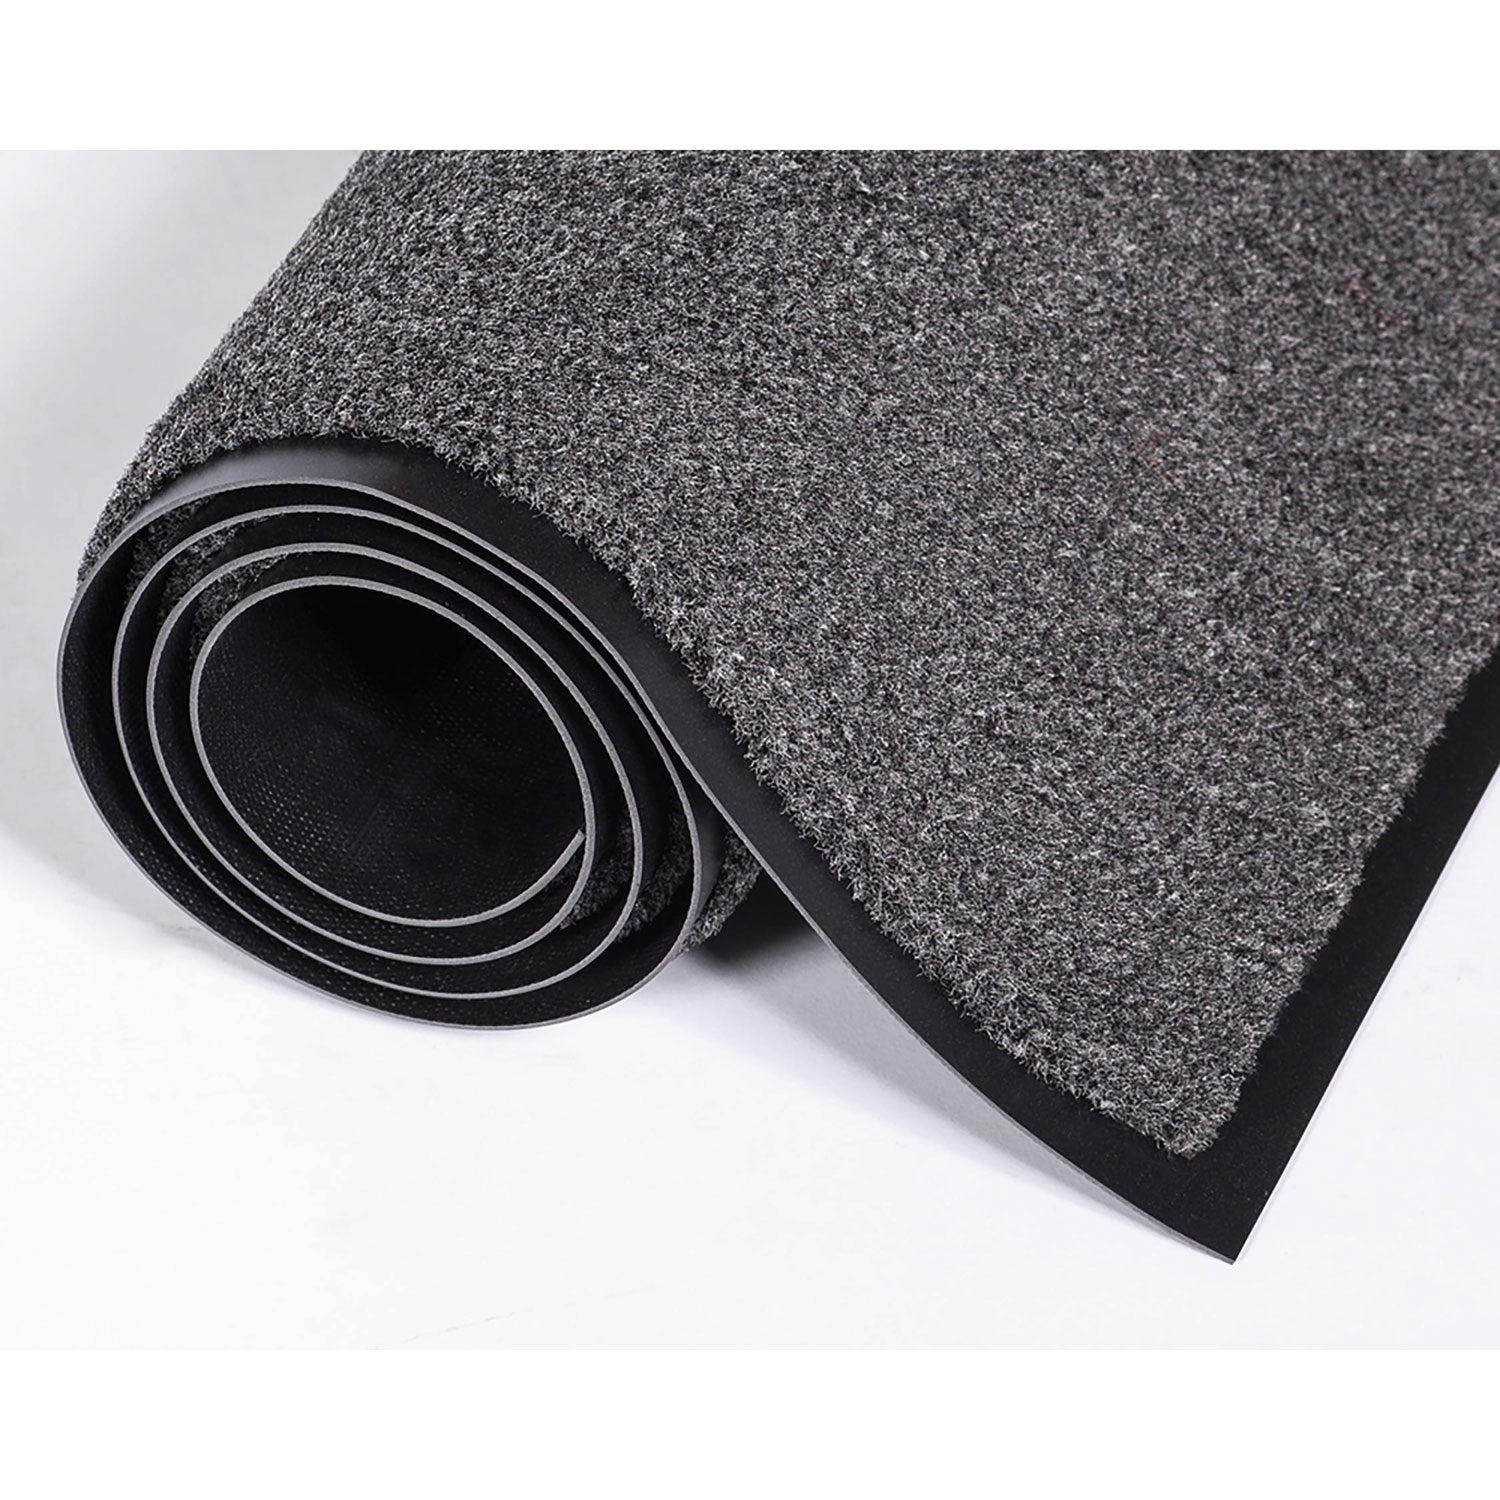 Rely-On Olefin Indoor Wiper Mat, 36 x 120, Charcoal - 2